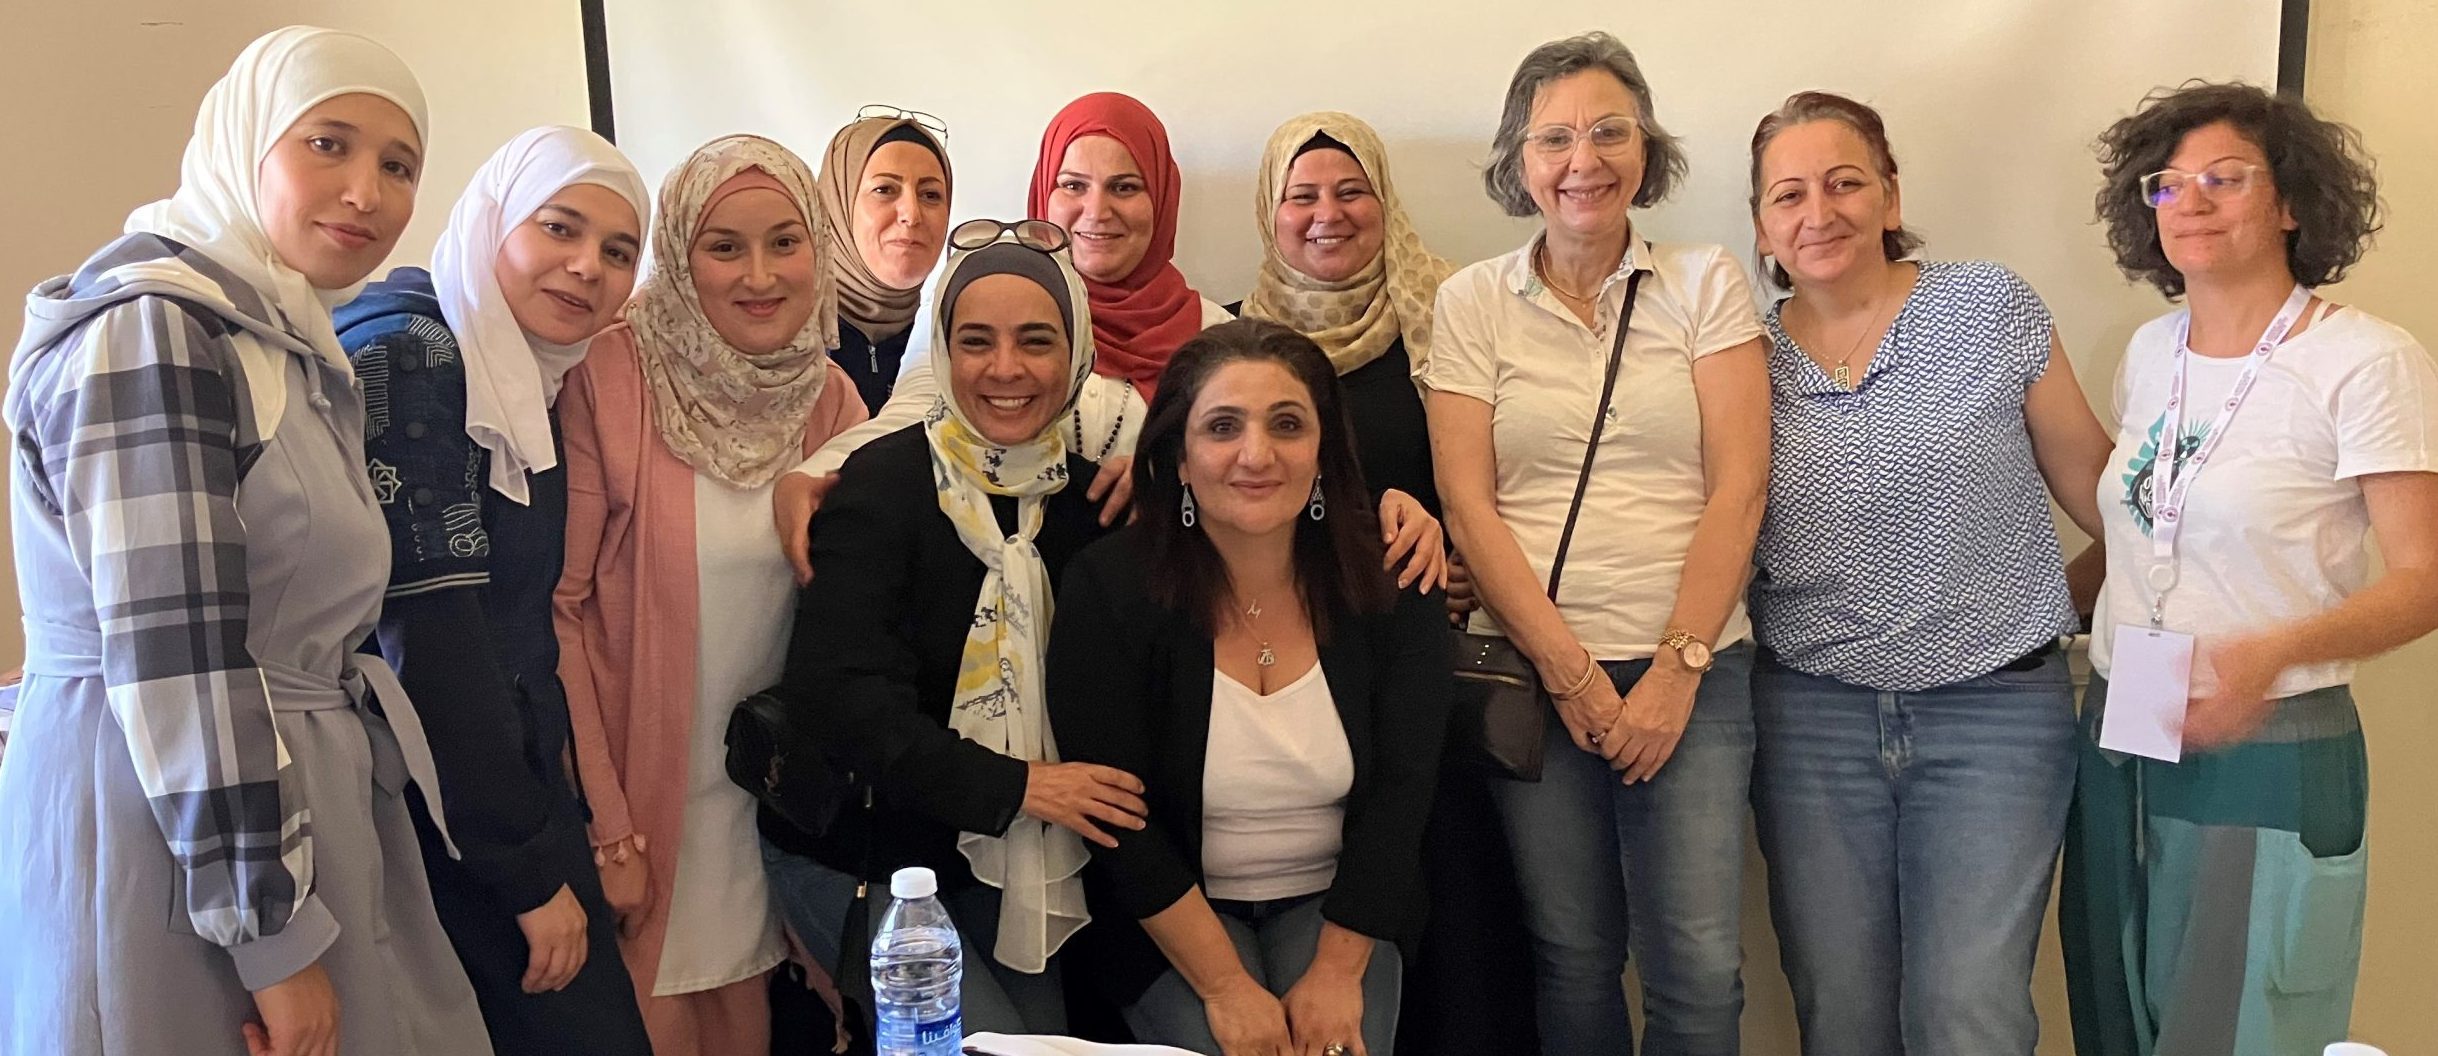 A group of smiling women, most of whom are wearing headscarves